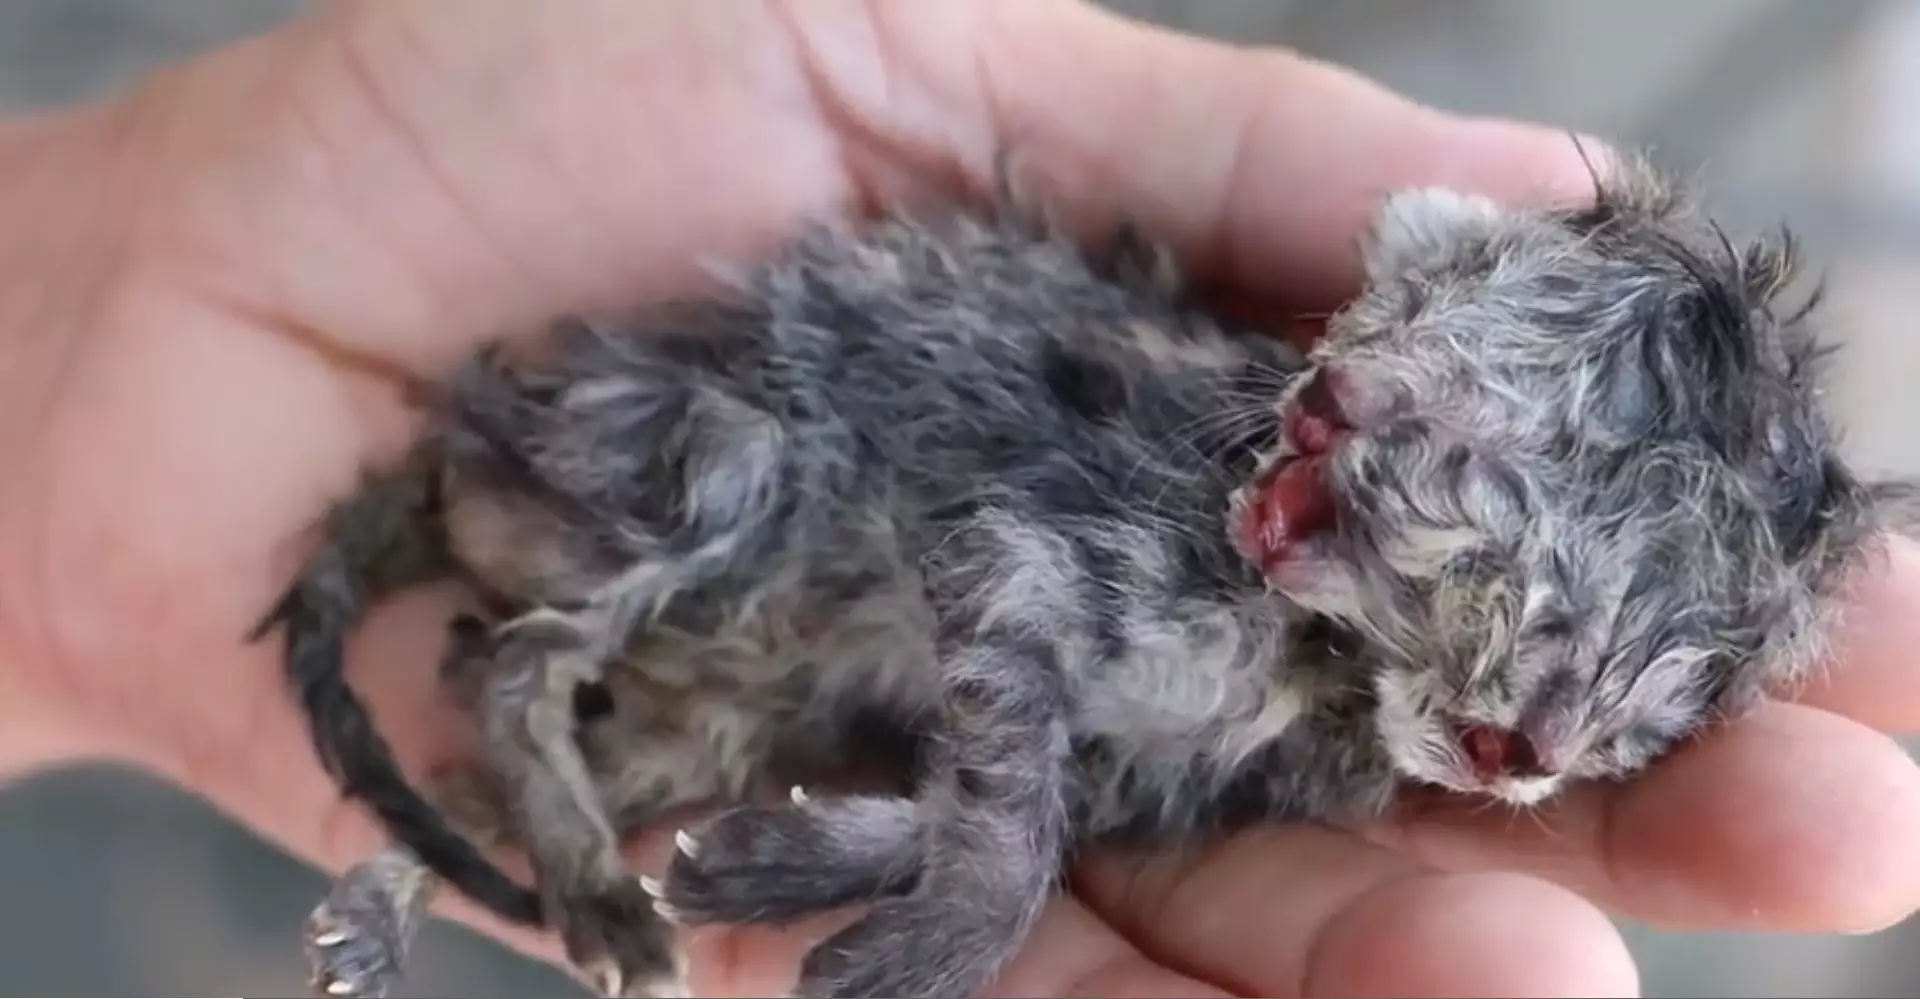 The kitten had CPR after birth to keep it alive.